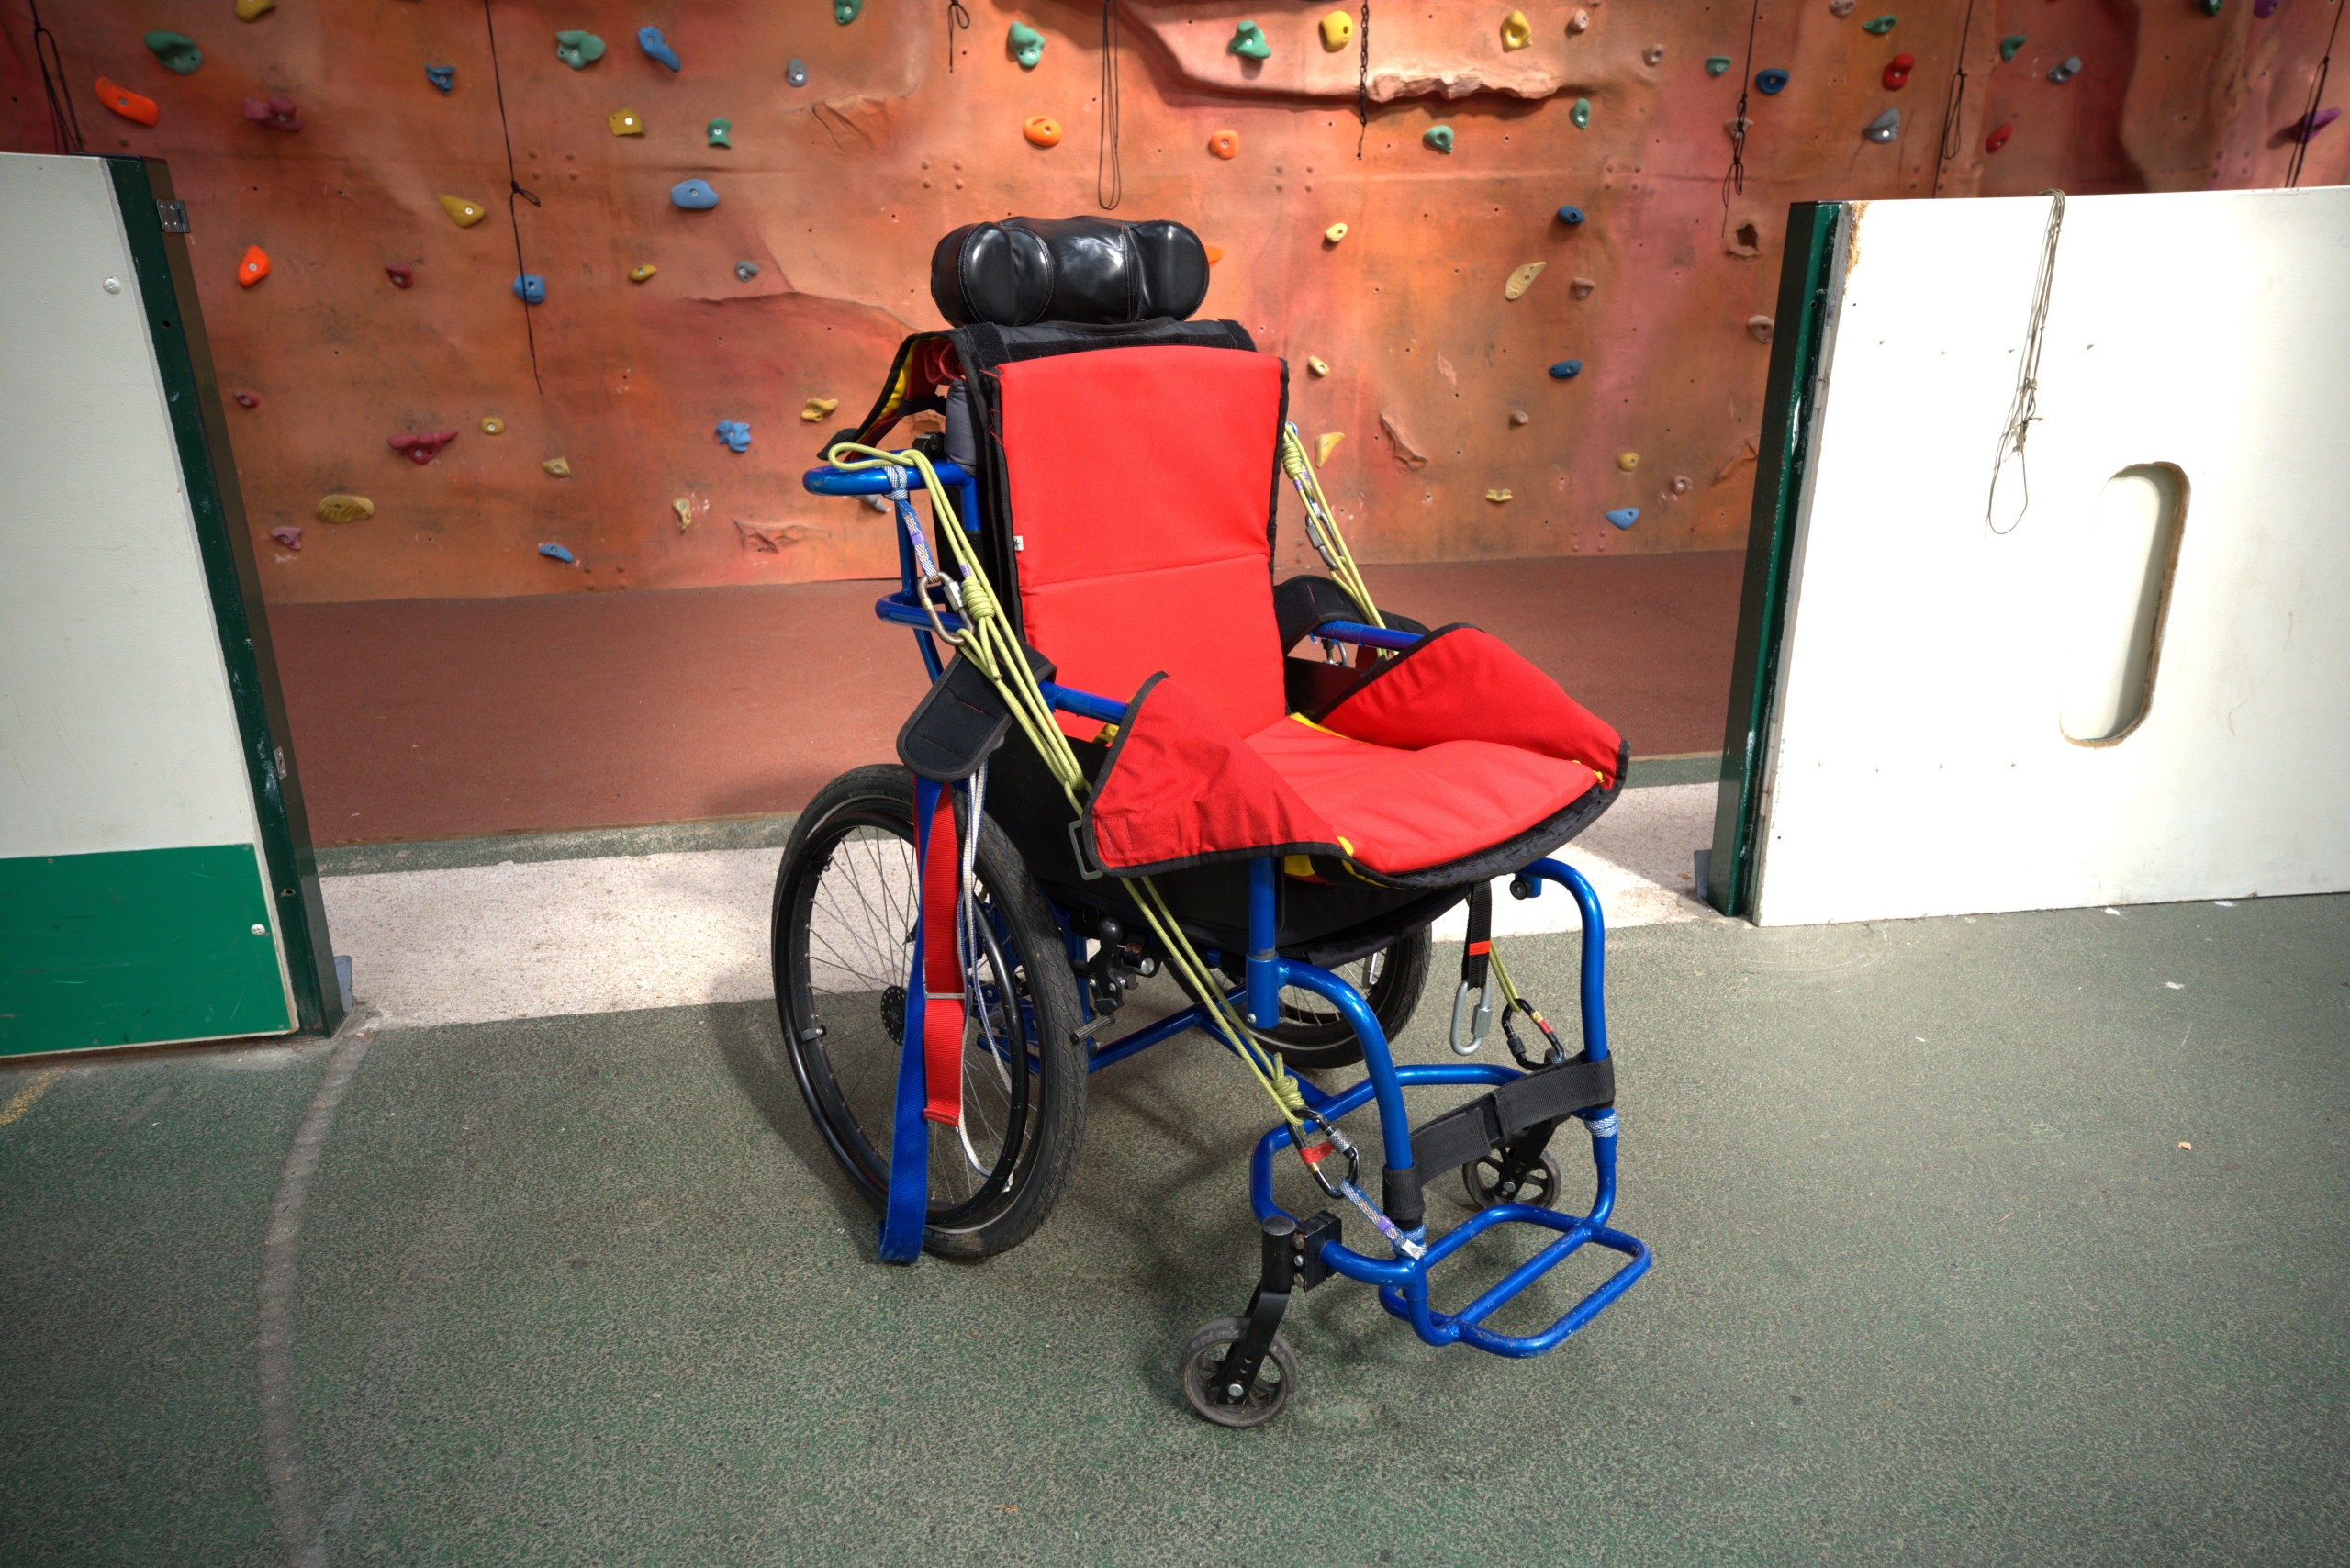 The blue Abseiling wheelchair with a red seat shaped cushion inside in the middle of the floor to showcase the equipment.